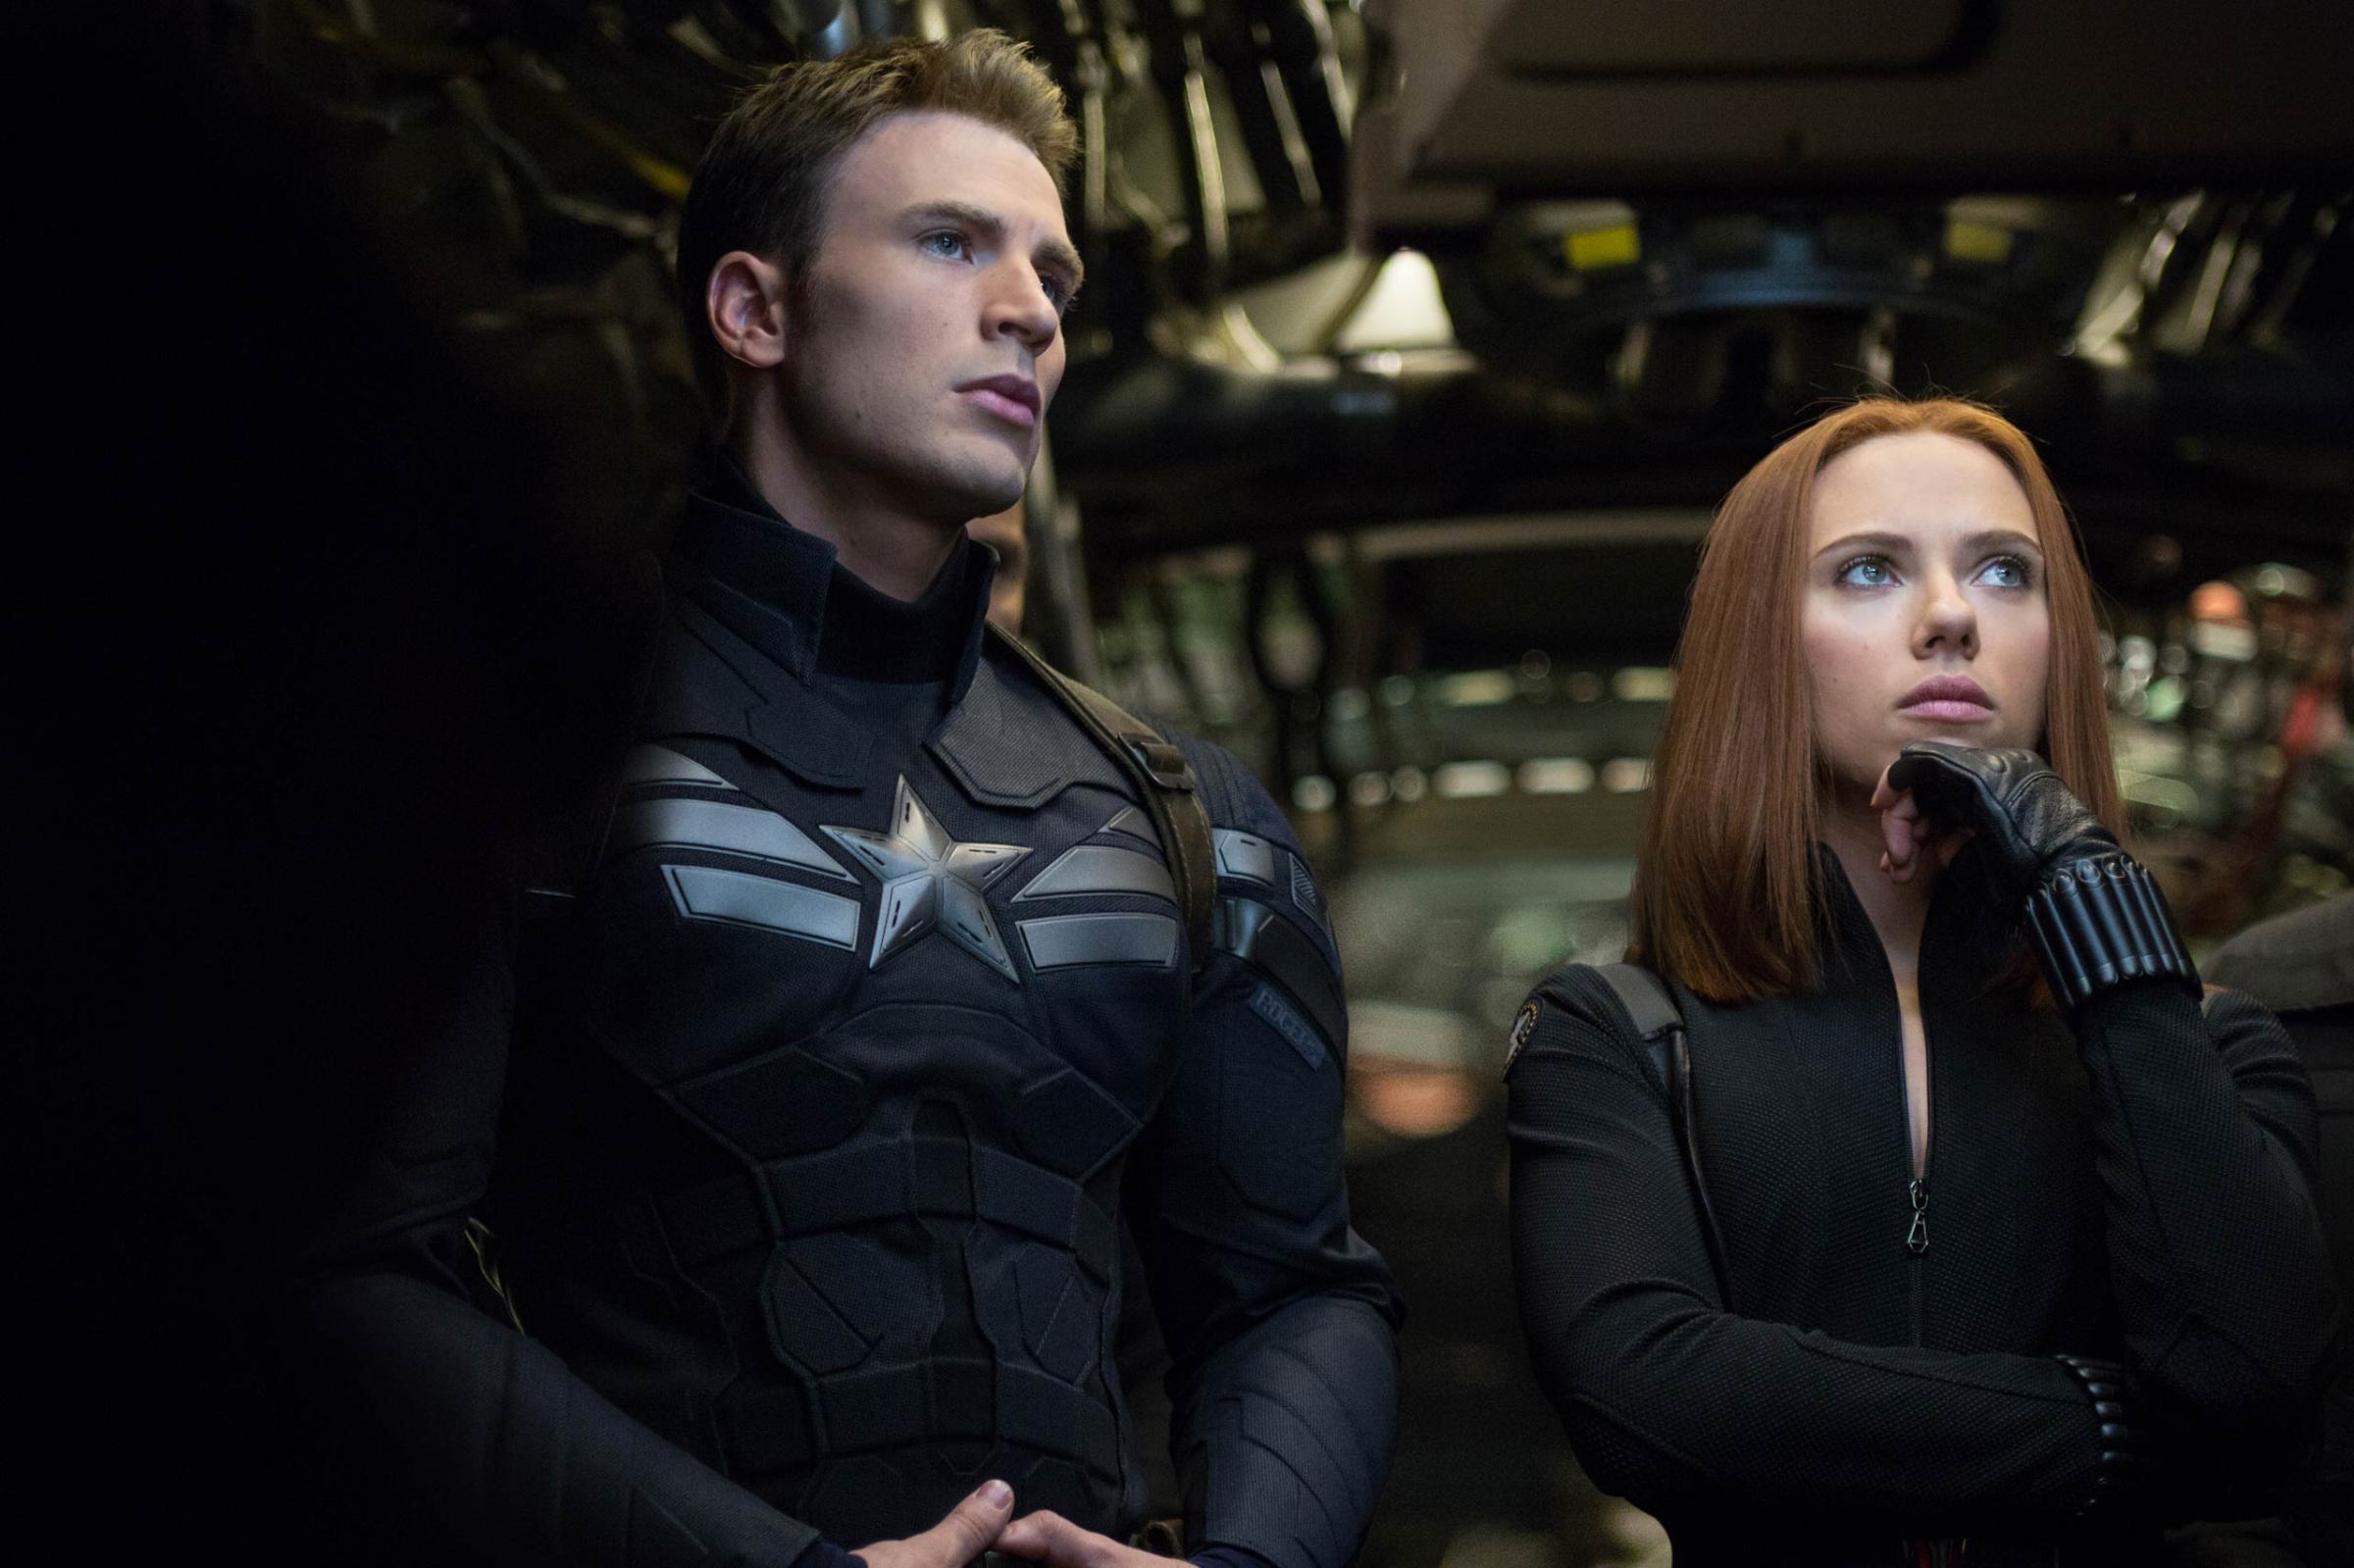 "Marvel's Captain America: The Winter Soldier"..L to R: Captain America/Steve Rogers (Chris Evans) and Black Widow/Natasha Romanoff (Scarlett Johansson) © 2014 Marvel.  All Rights Reserved.